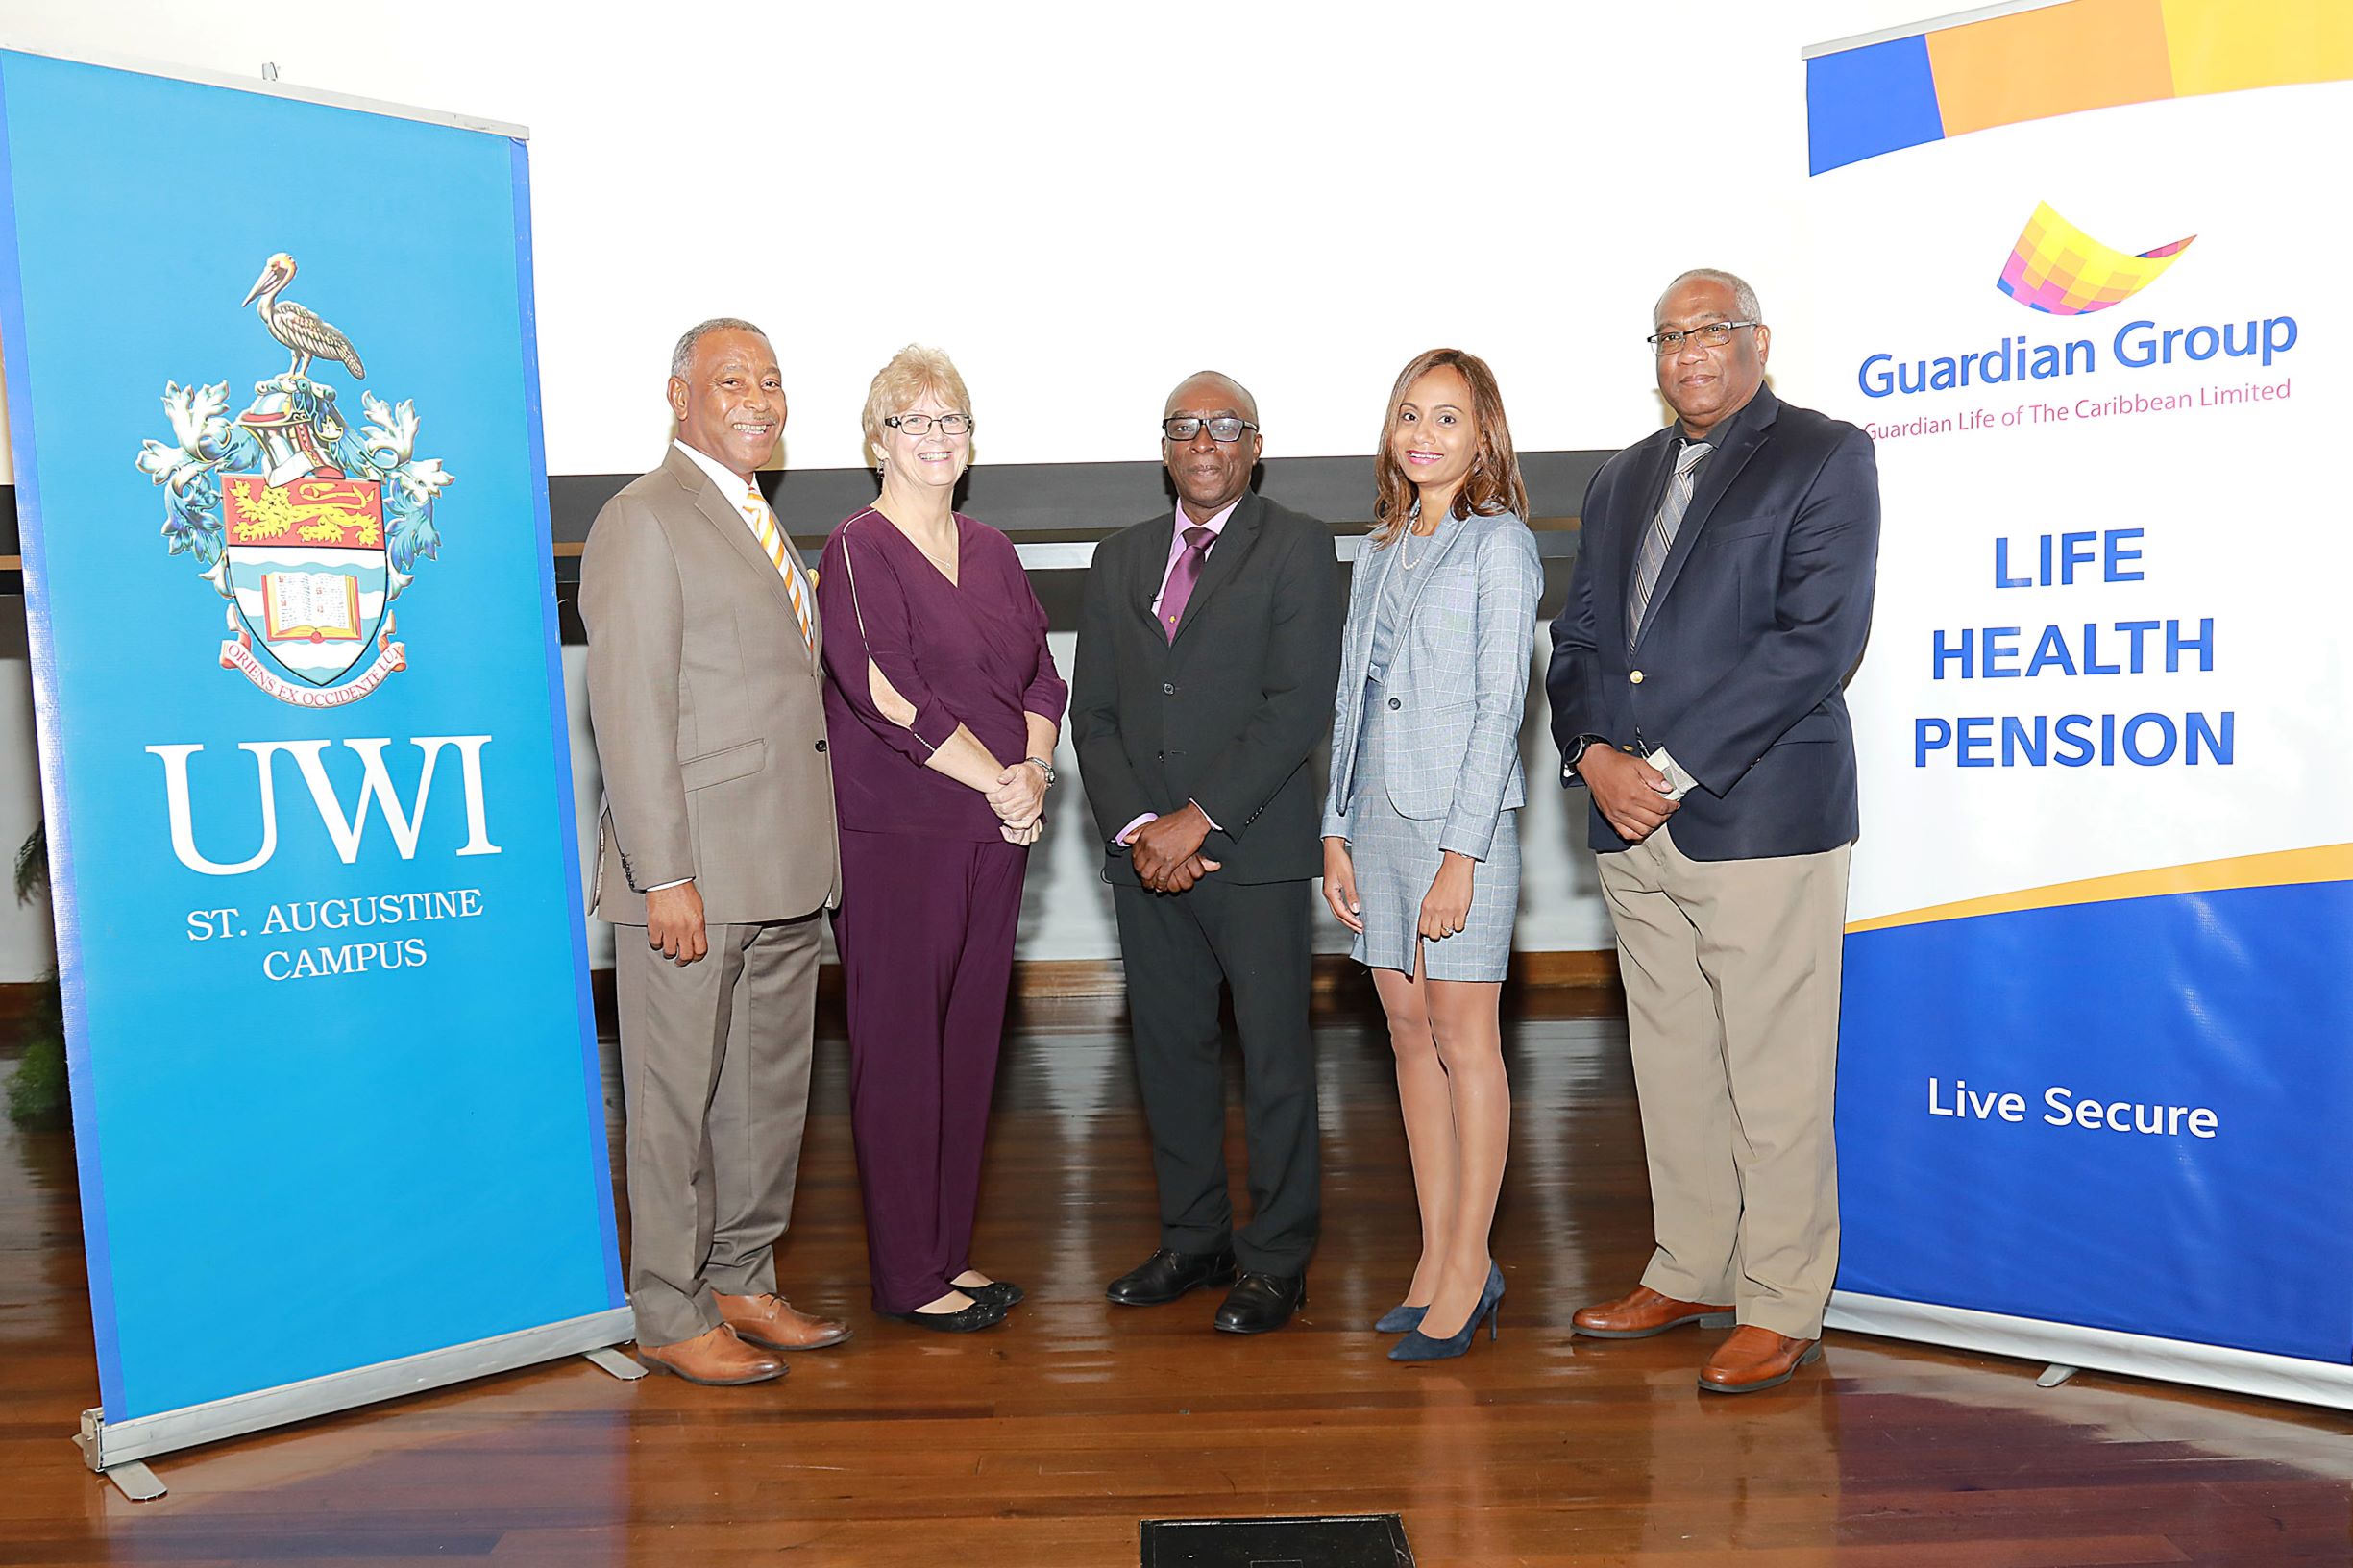 [L-R] Mr. Keston Nancoo, Advisor, Guardian Life of the Caribbean Ltd; Dr Margo Burns, Director, The UWI St. Augustine Campus Centre for Excellence in Teaching and Learning; Professor Wendel Abel, Professor of Mental Health Policy and Head of the Department of Community Health and Psychiatry at the Faculty of Medical Sciences, The UWI Mona Campus; Ms. Samanta Saugh, Vice President of Finance, Guardian Life of the Caribbean Ltd; and Pro Vice-Chancellor and Campus Principal of The UWI St. Augustine Professor Brian Copeland at The UWI/Guardian Group Premium Open Lecture.